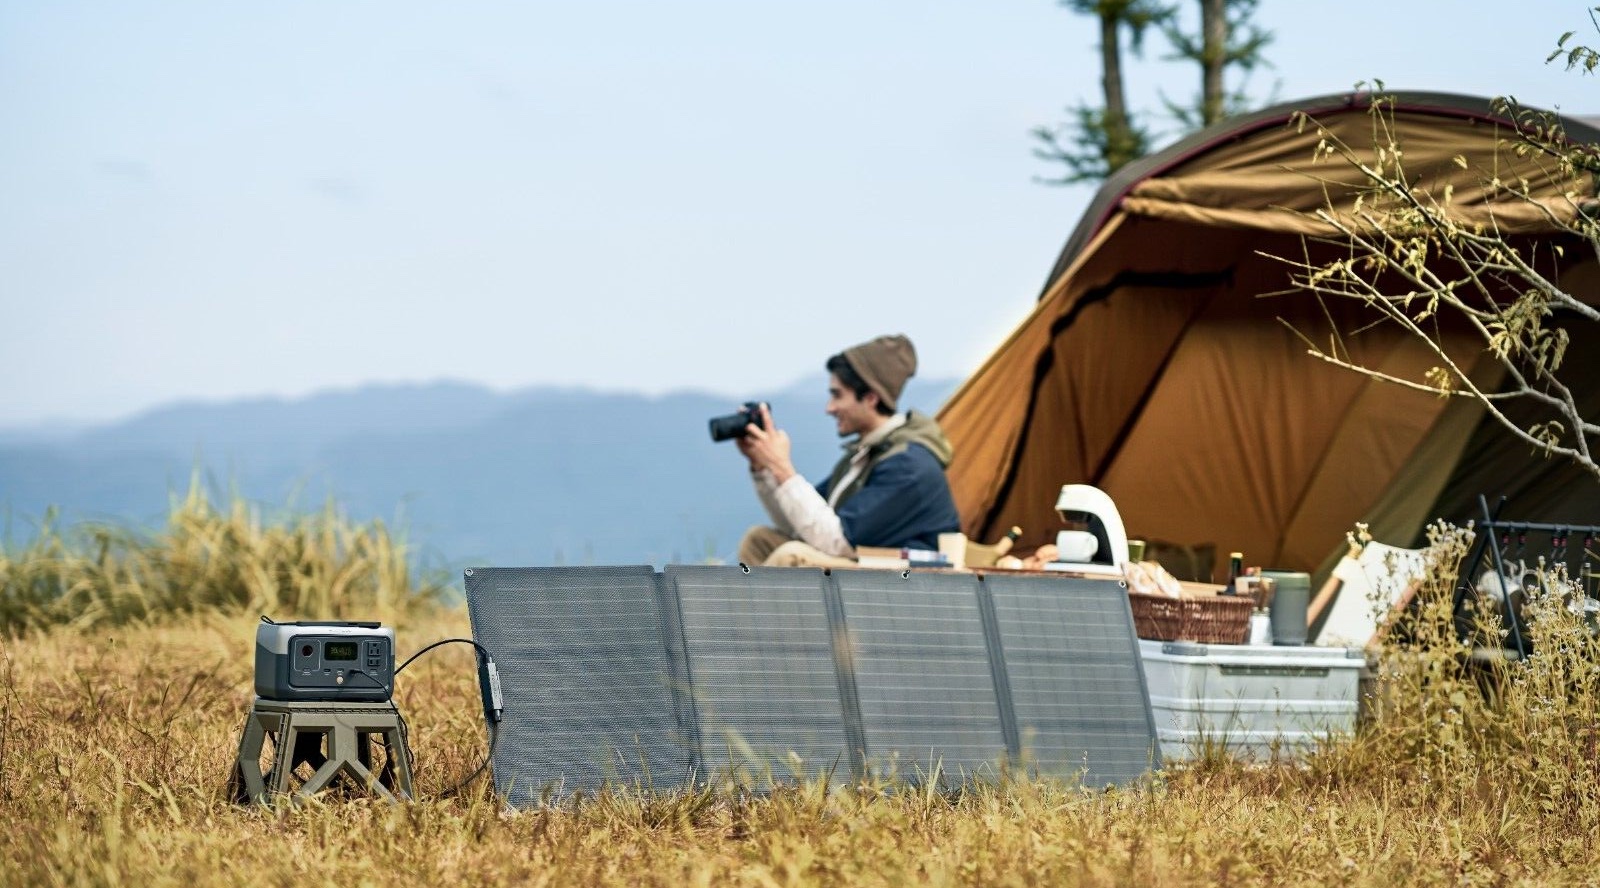 Solar panels with battery storage at photographer's campsite with tent